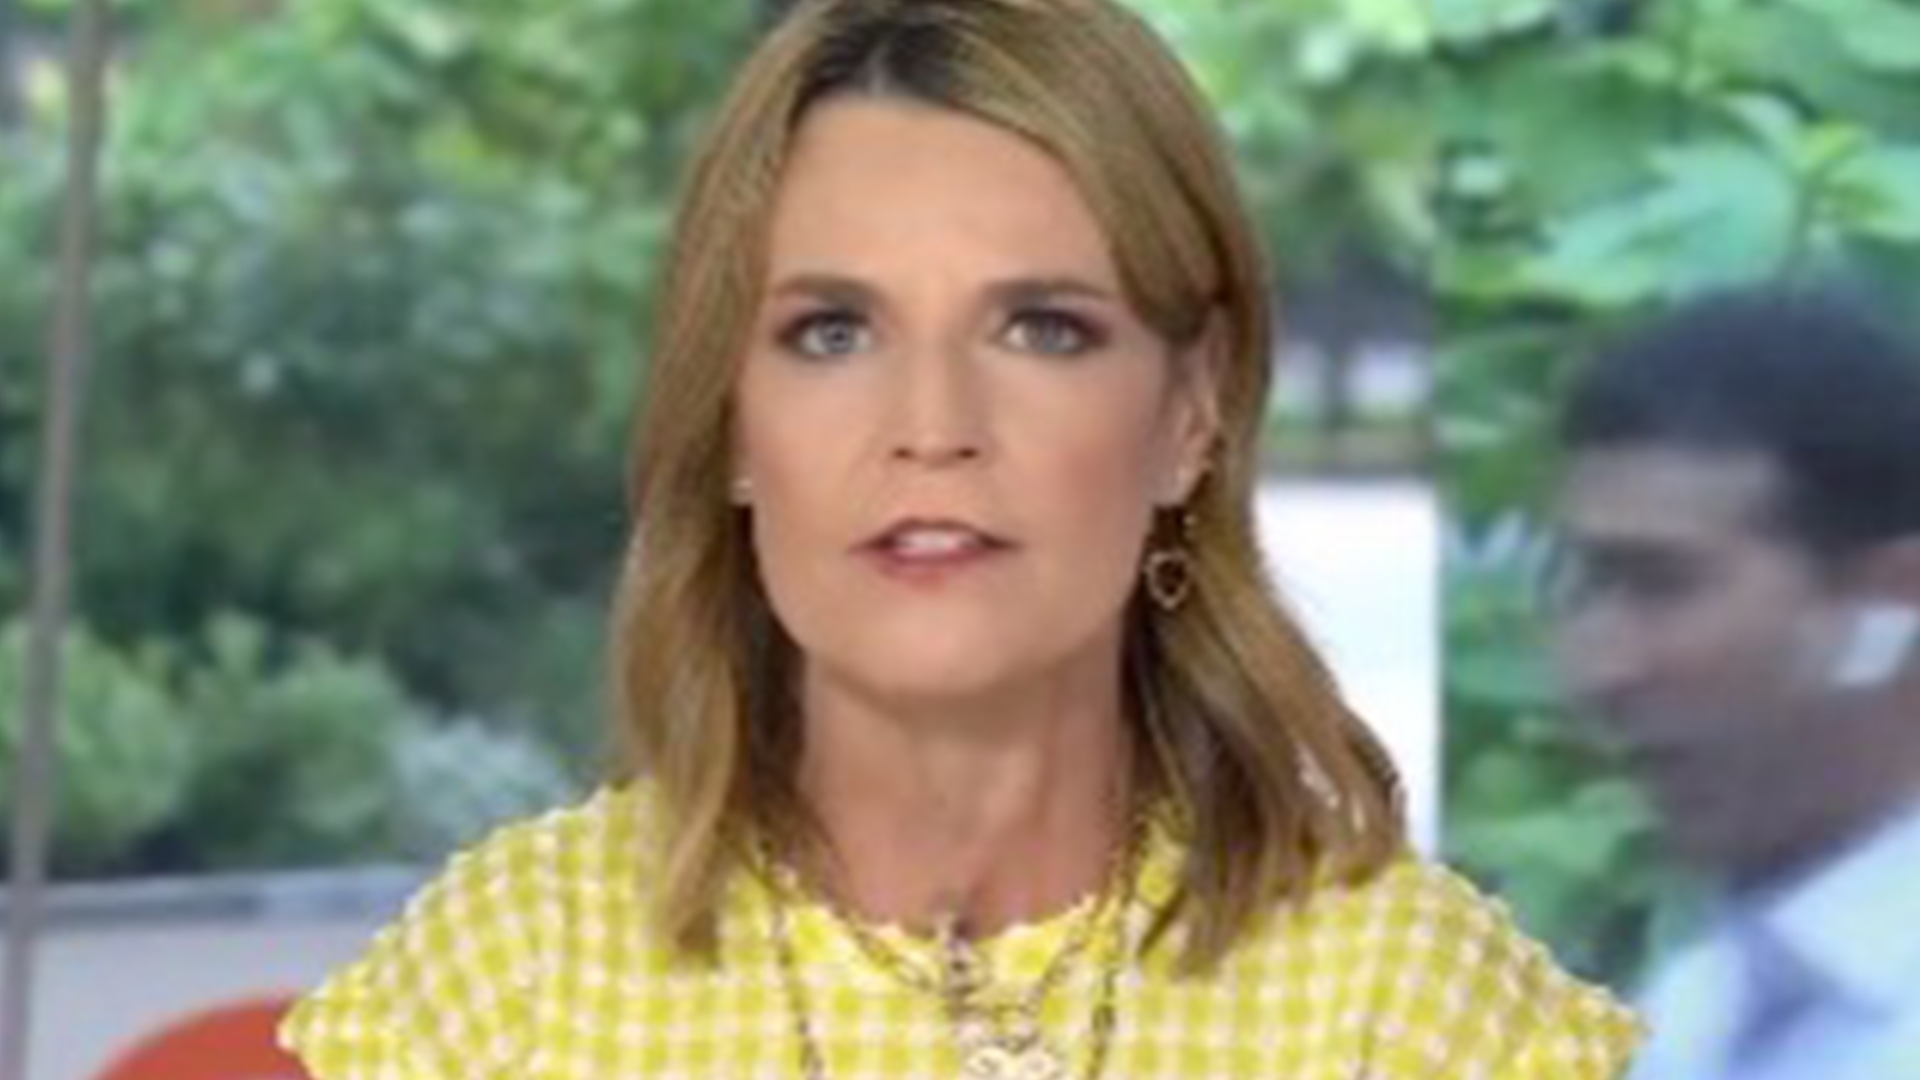 Savannah Guthrie says she’s ‘keeping it real’ & captions pic ‘if looks could kill’ after Hoda Kotb’s teary TV appearance